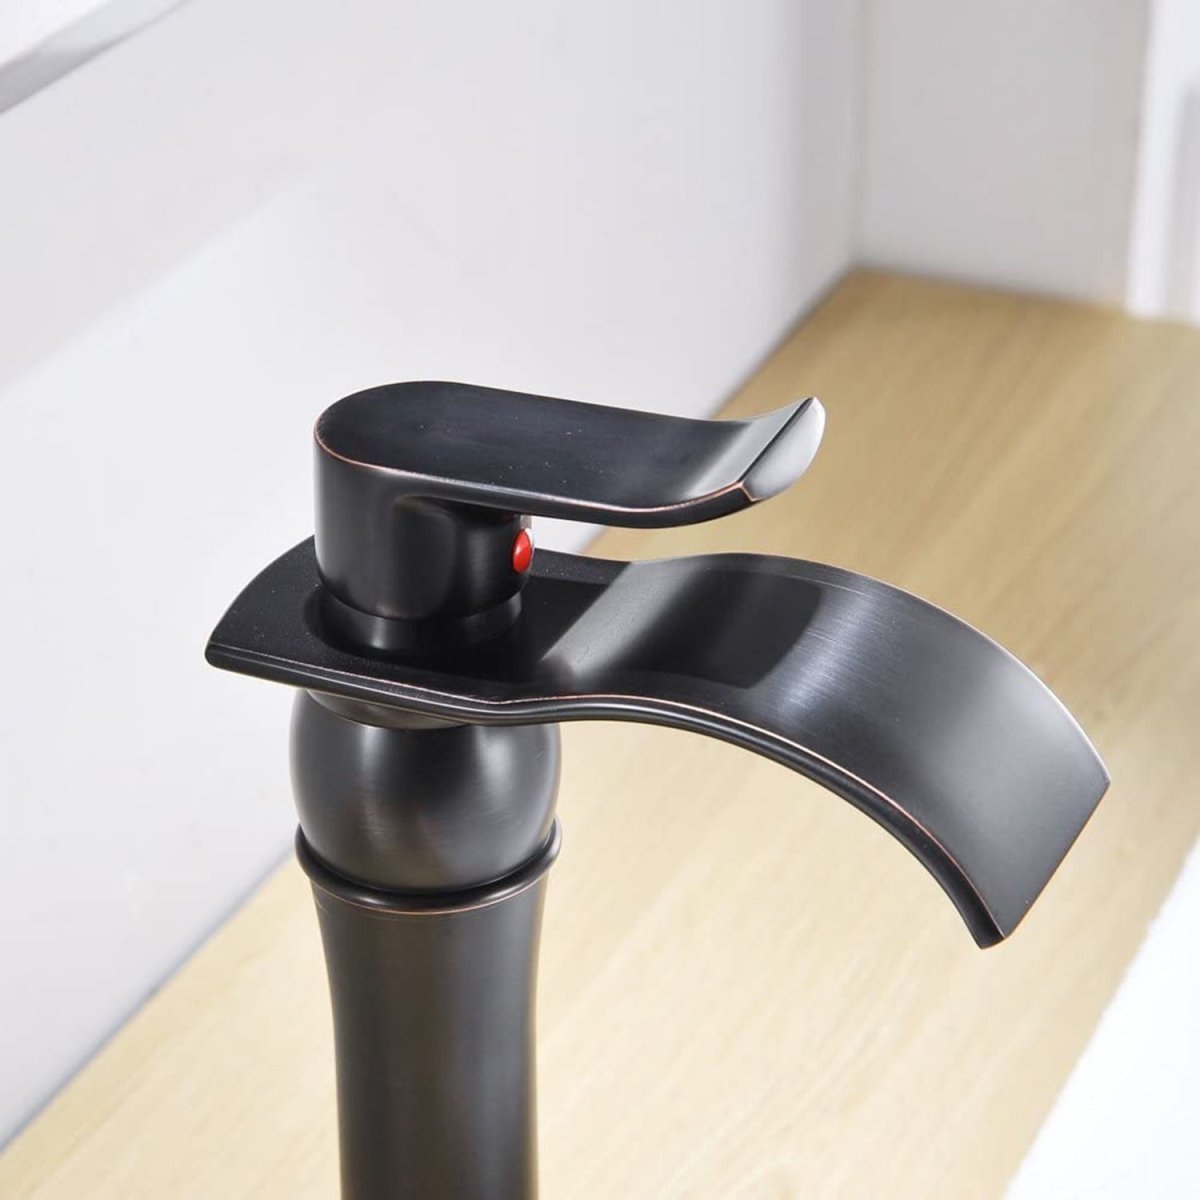 Waterfall Single Hole Bathroom Faucet Oil Rubbed Bronze-1 - buyfaucet.com